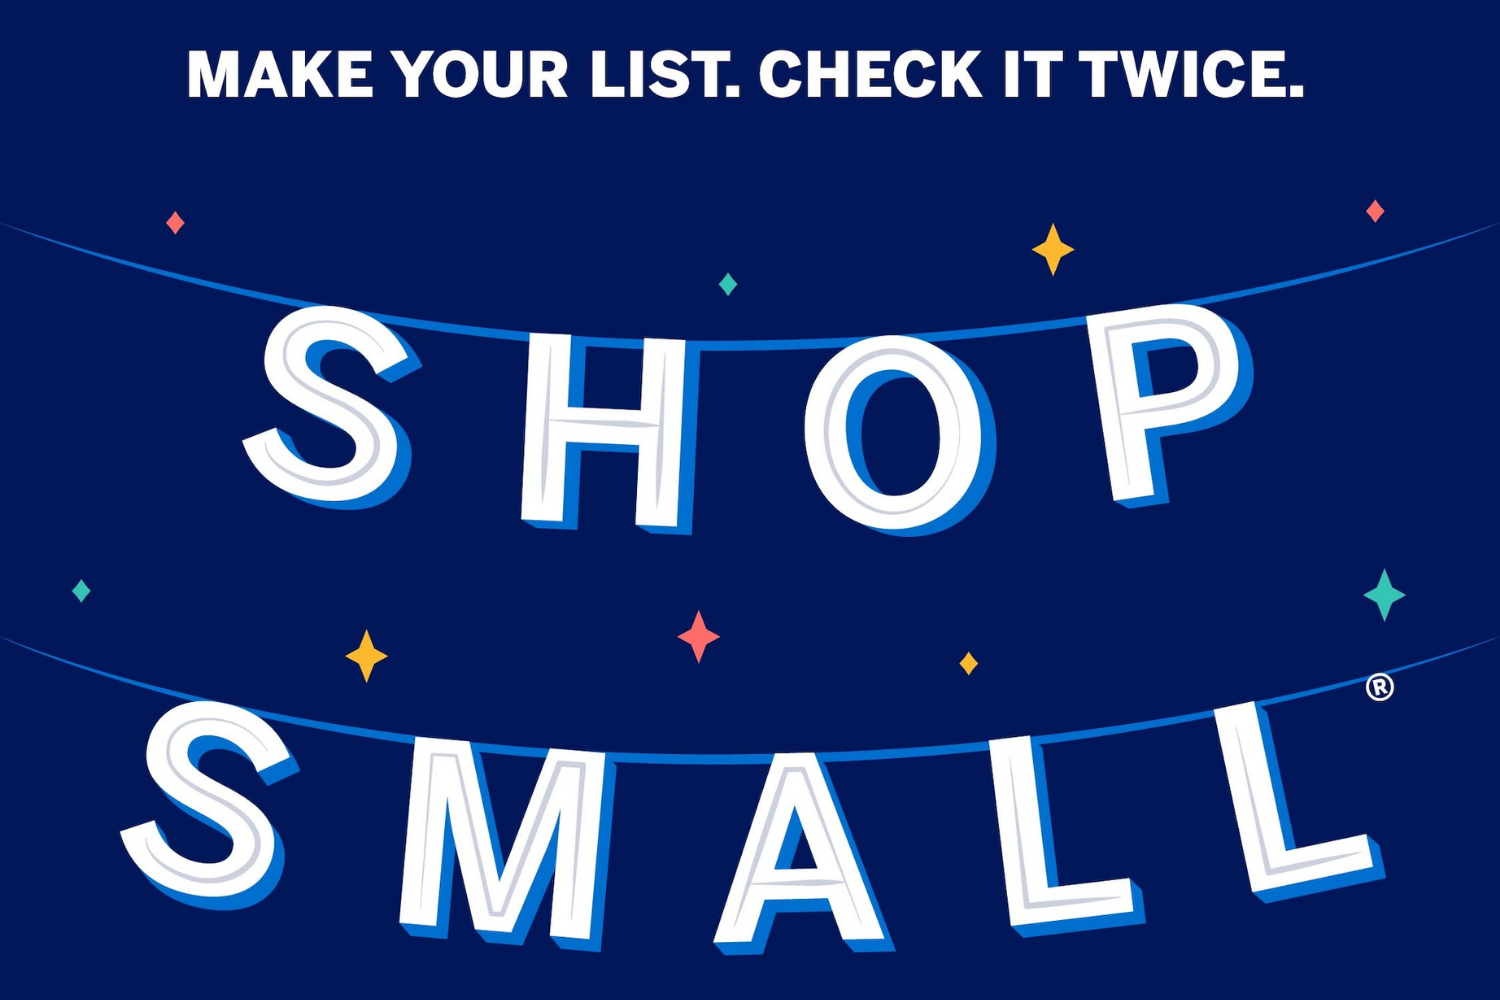 Graphic saying "Shop Small" for Small Business Saturday